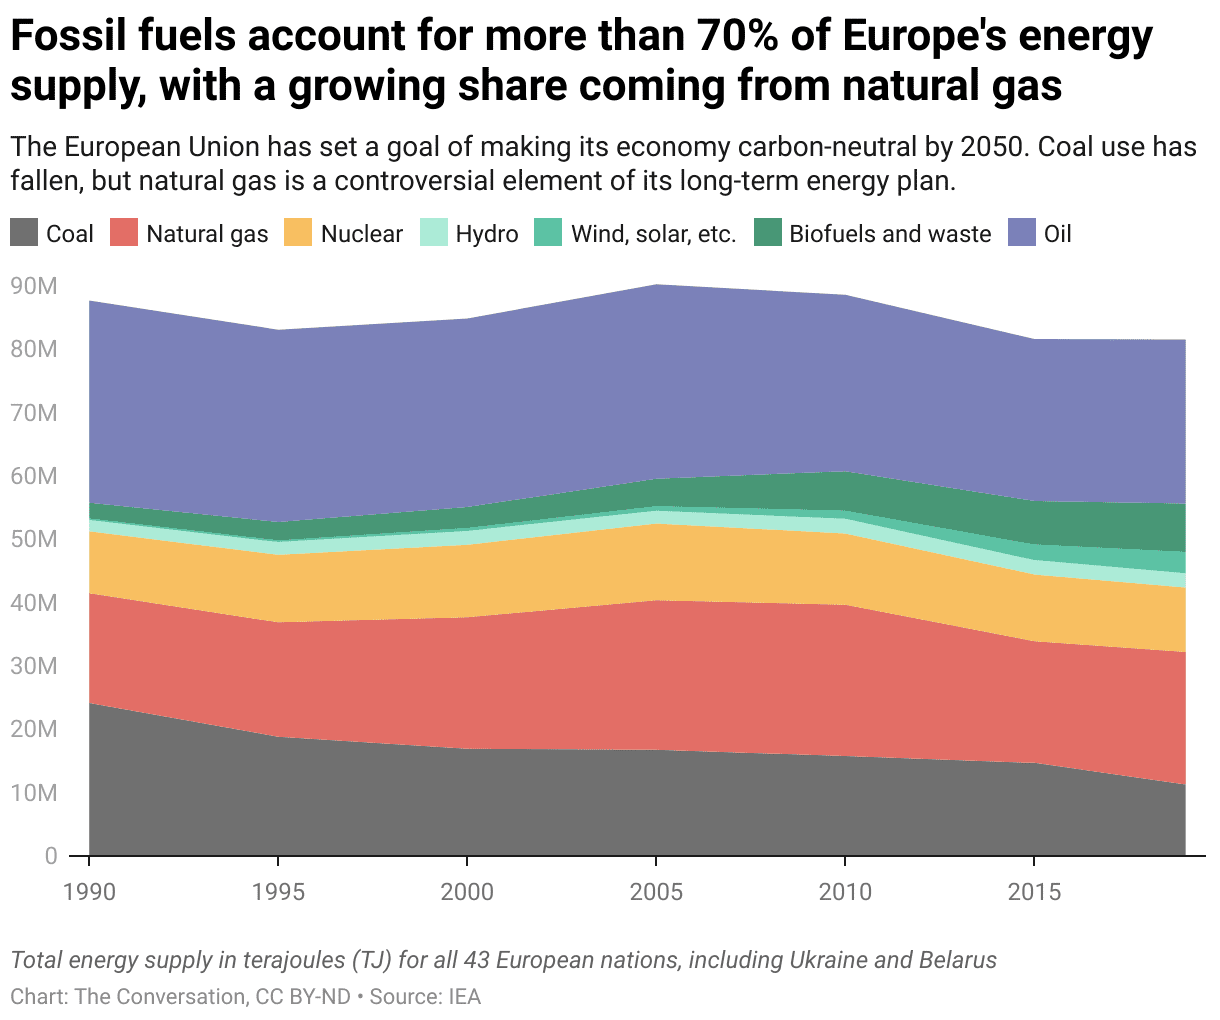 fossil-fuels-account-for-more-than-70-of-europe-s-energy-supply-with-a-growing-share-coming-from-natural-gas-.png